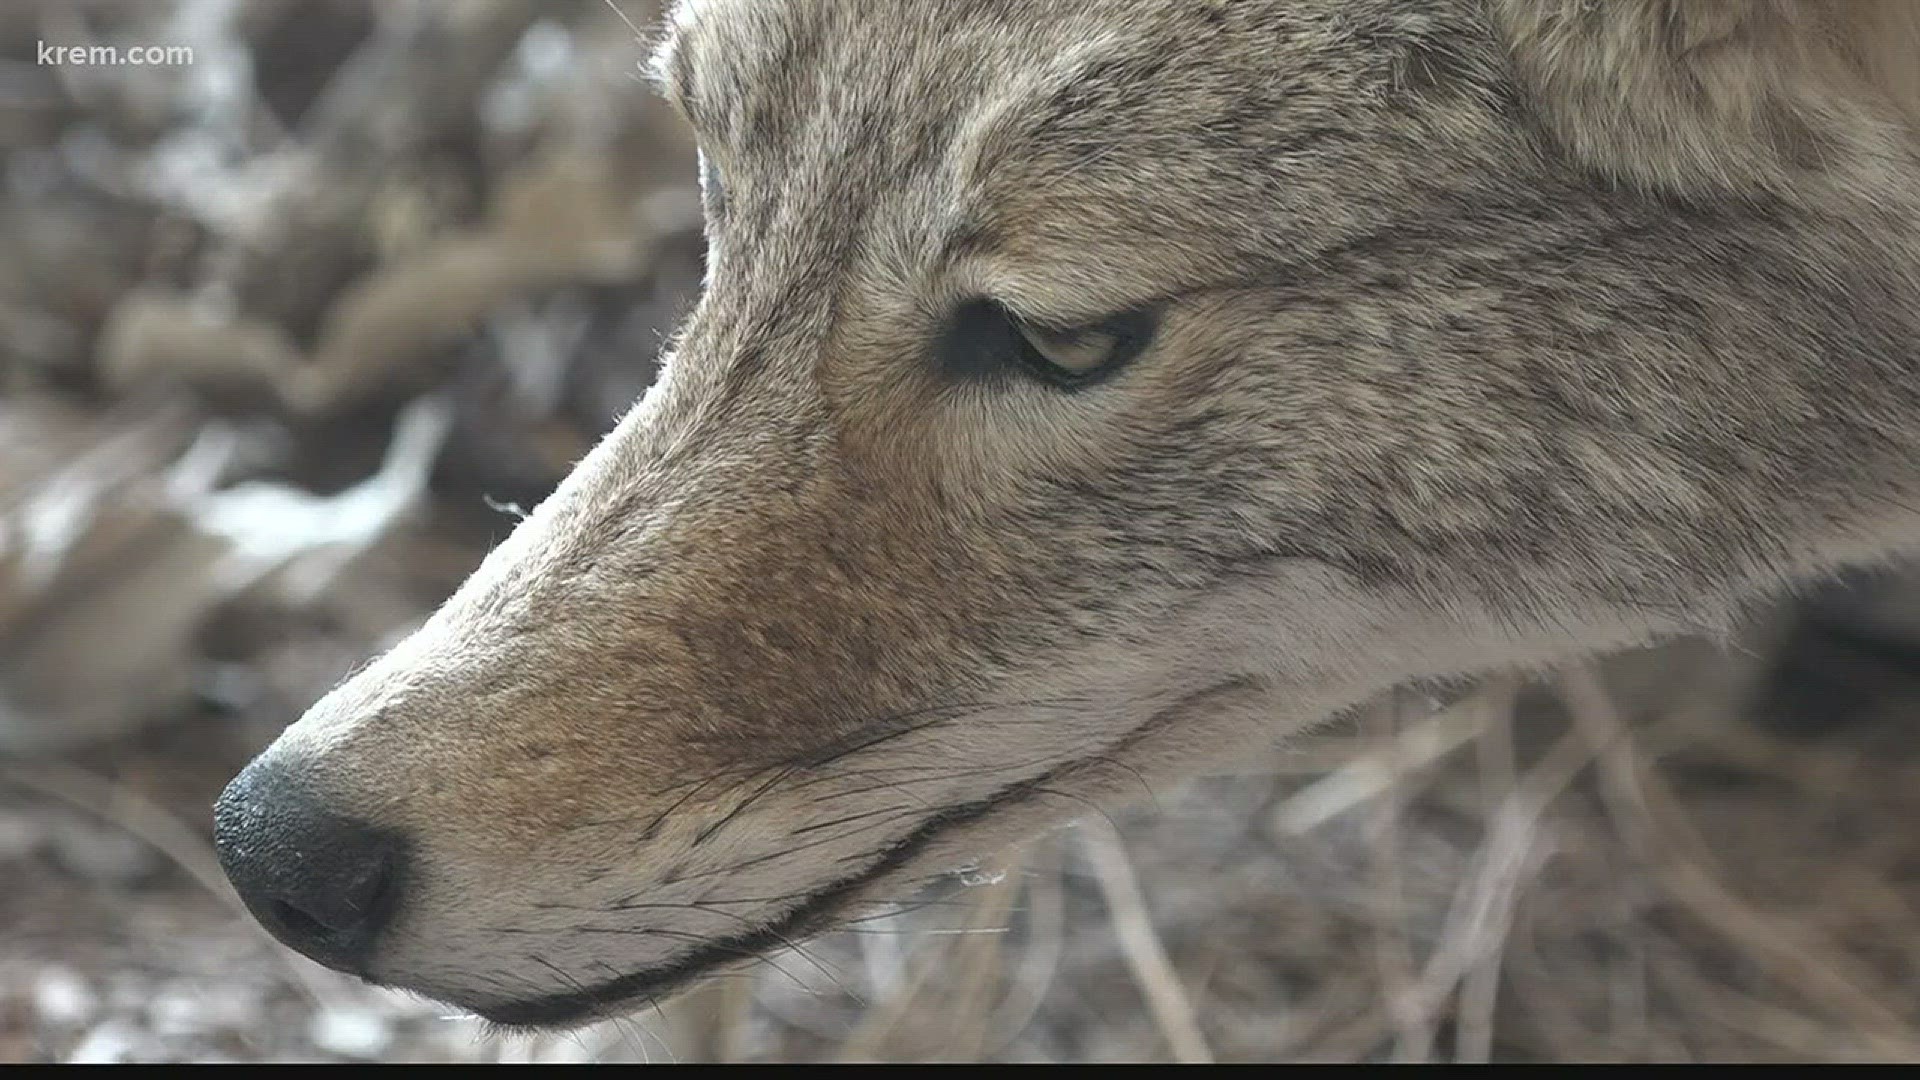 Coyote or Wolf?